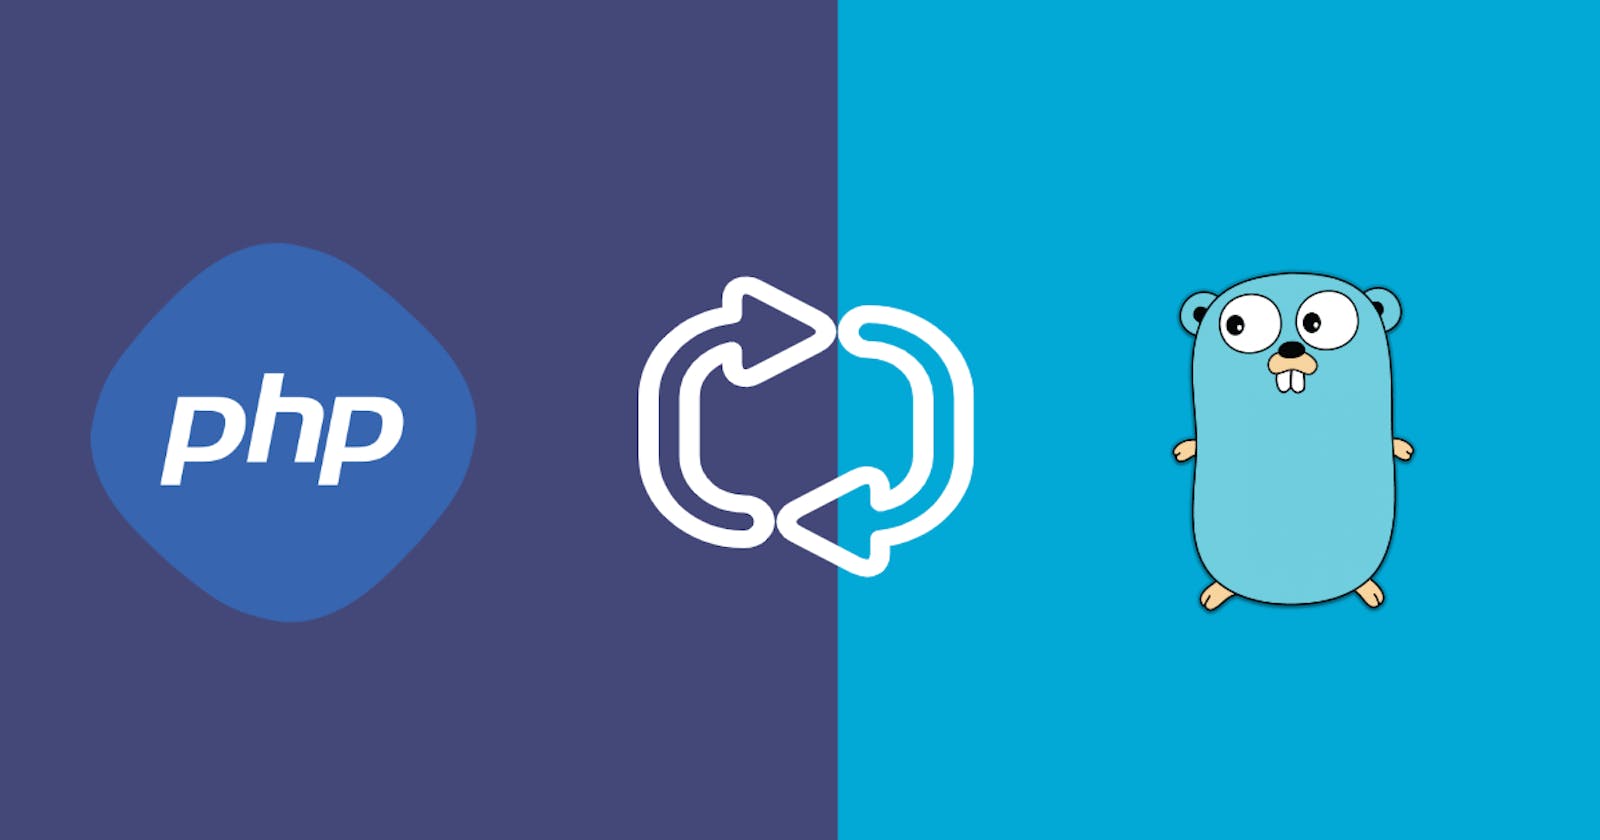 Take PHP to the next level with Coroutines, Event Loop or Golang